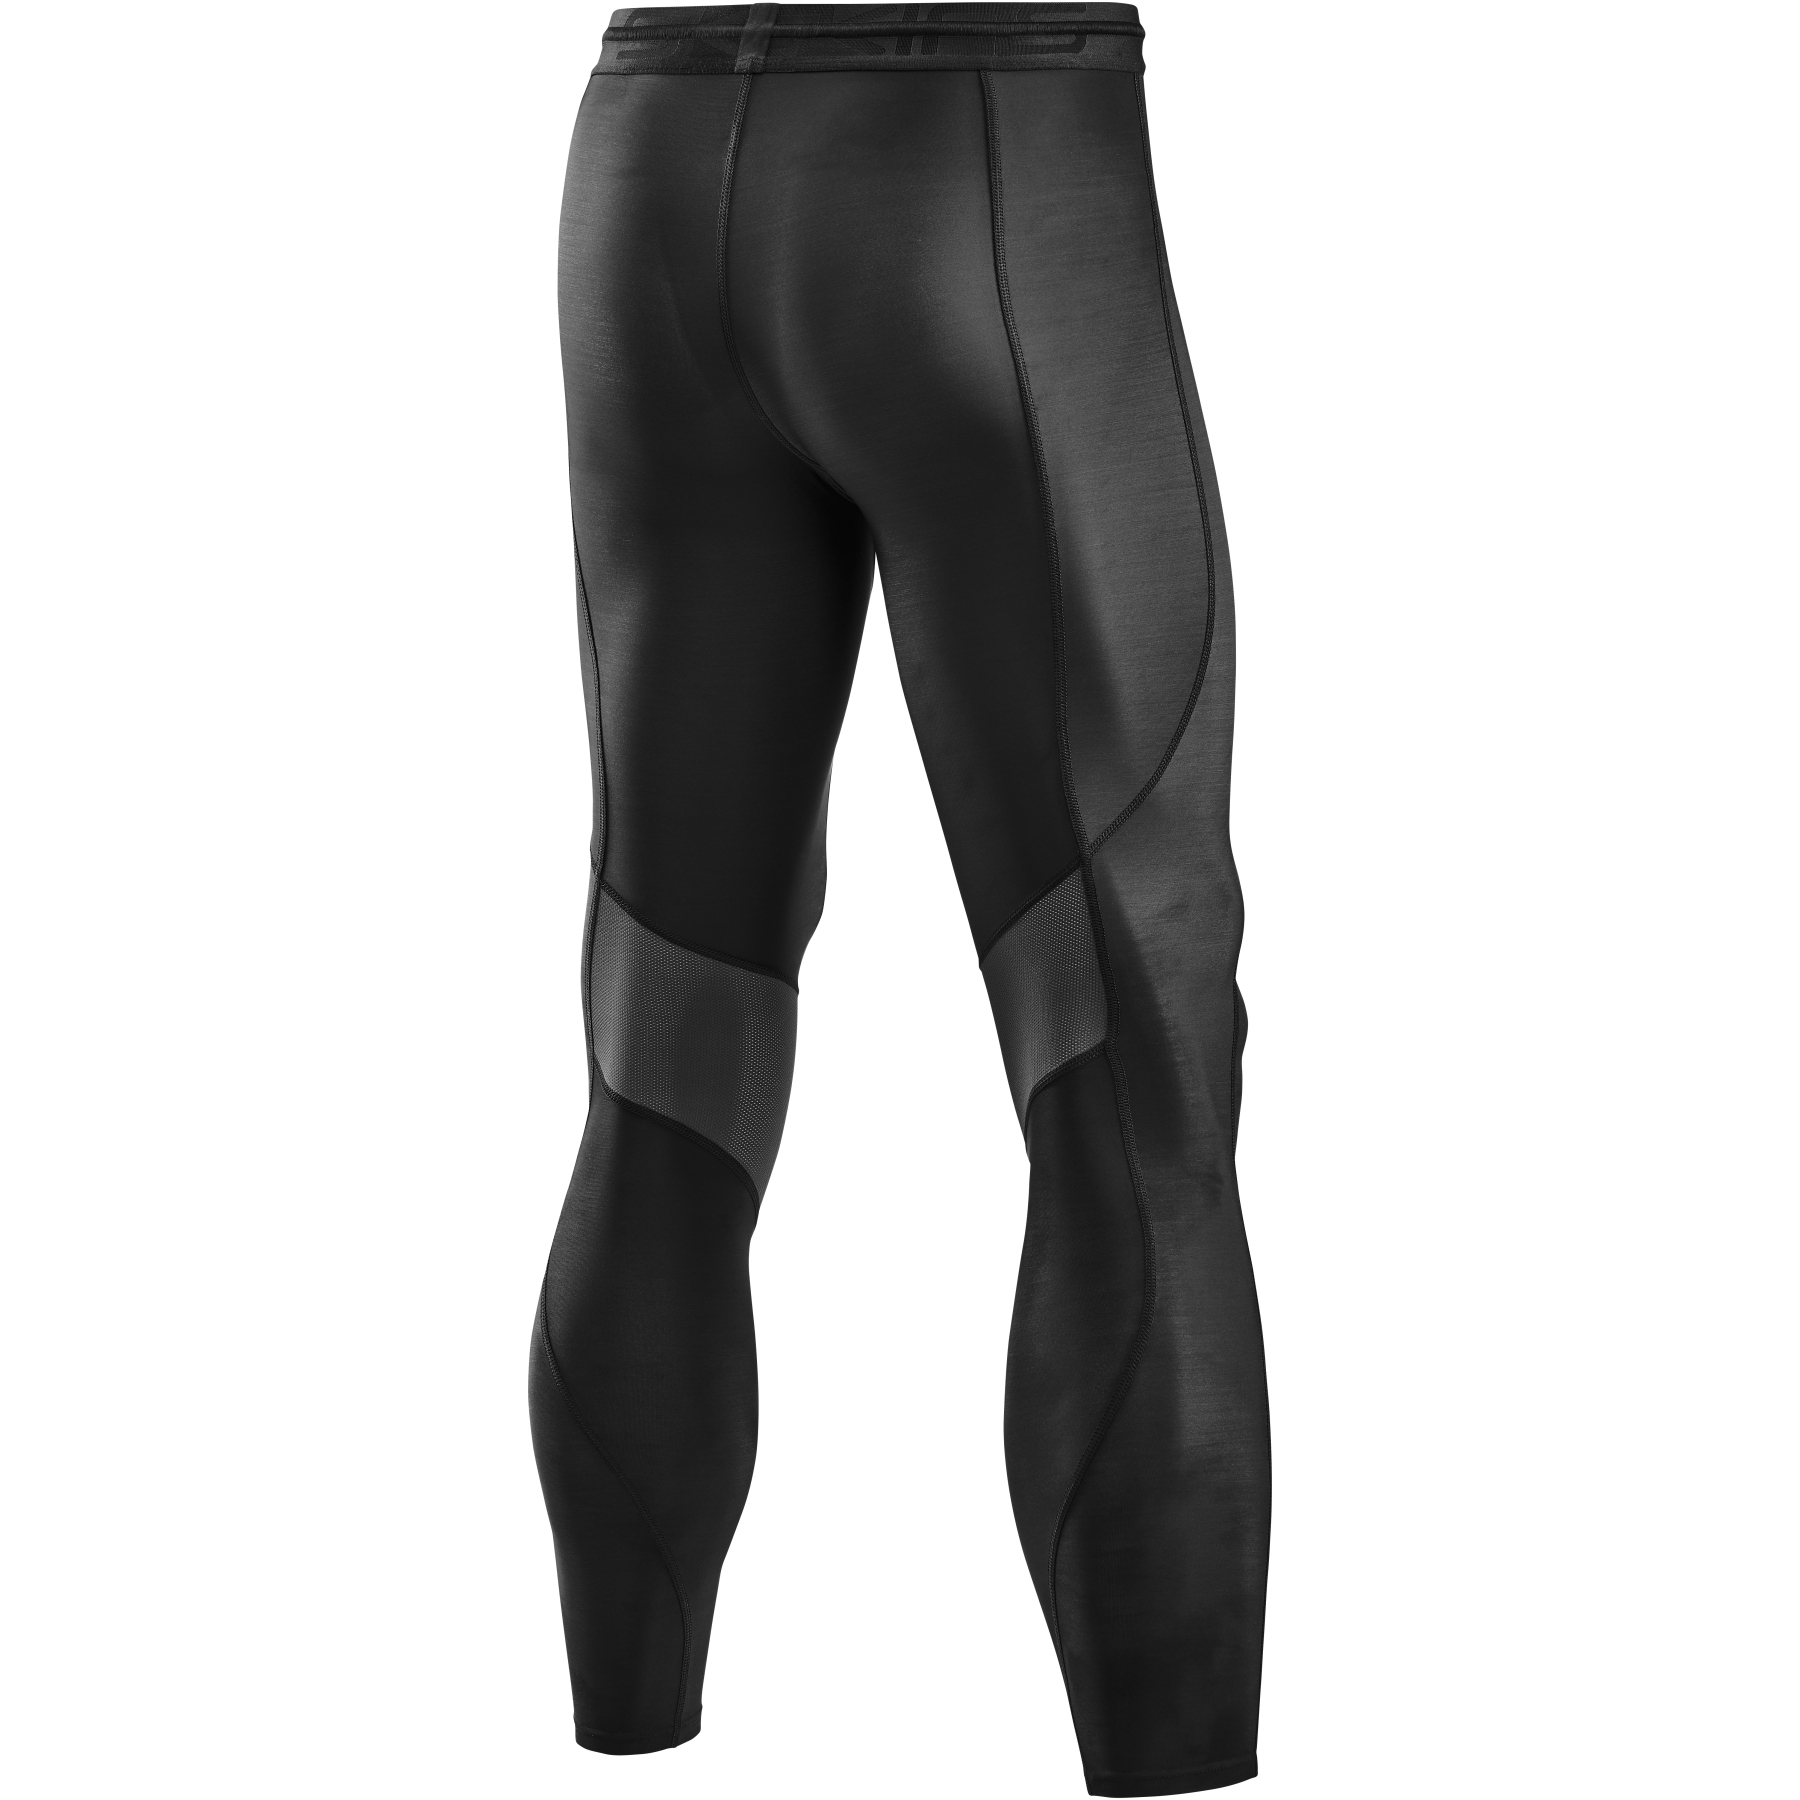 SKINS 3-Series Recovery Long Tights Men - Black/Graphite